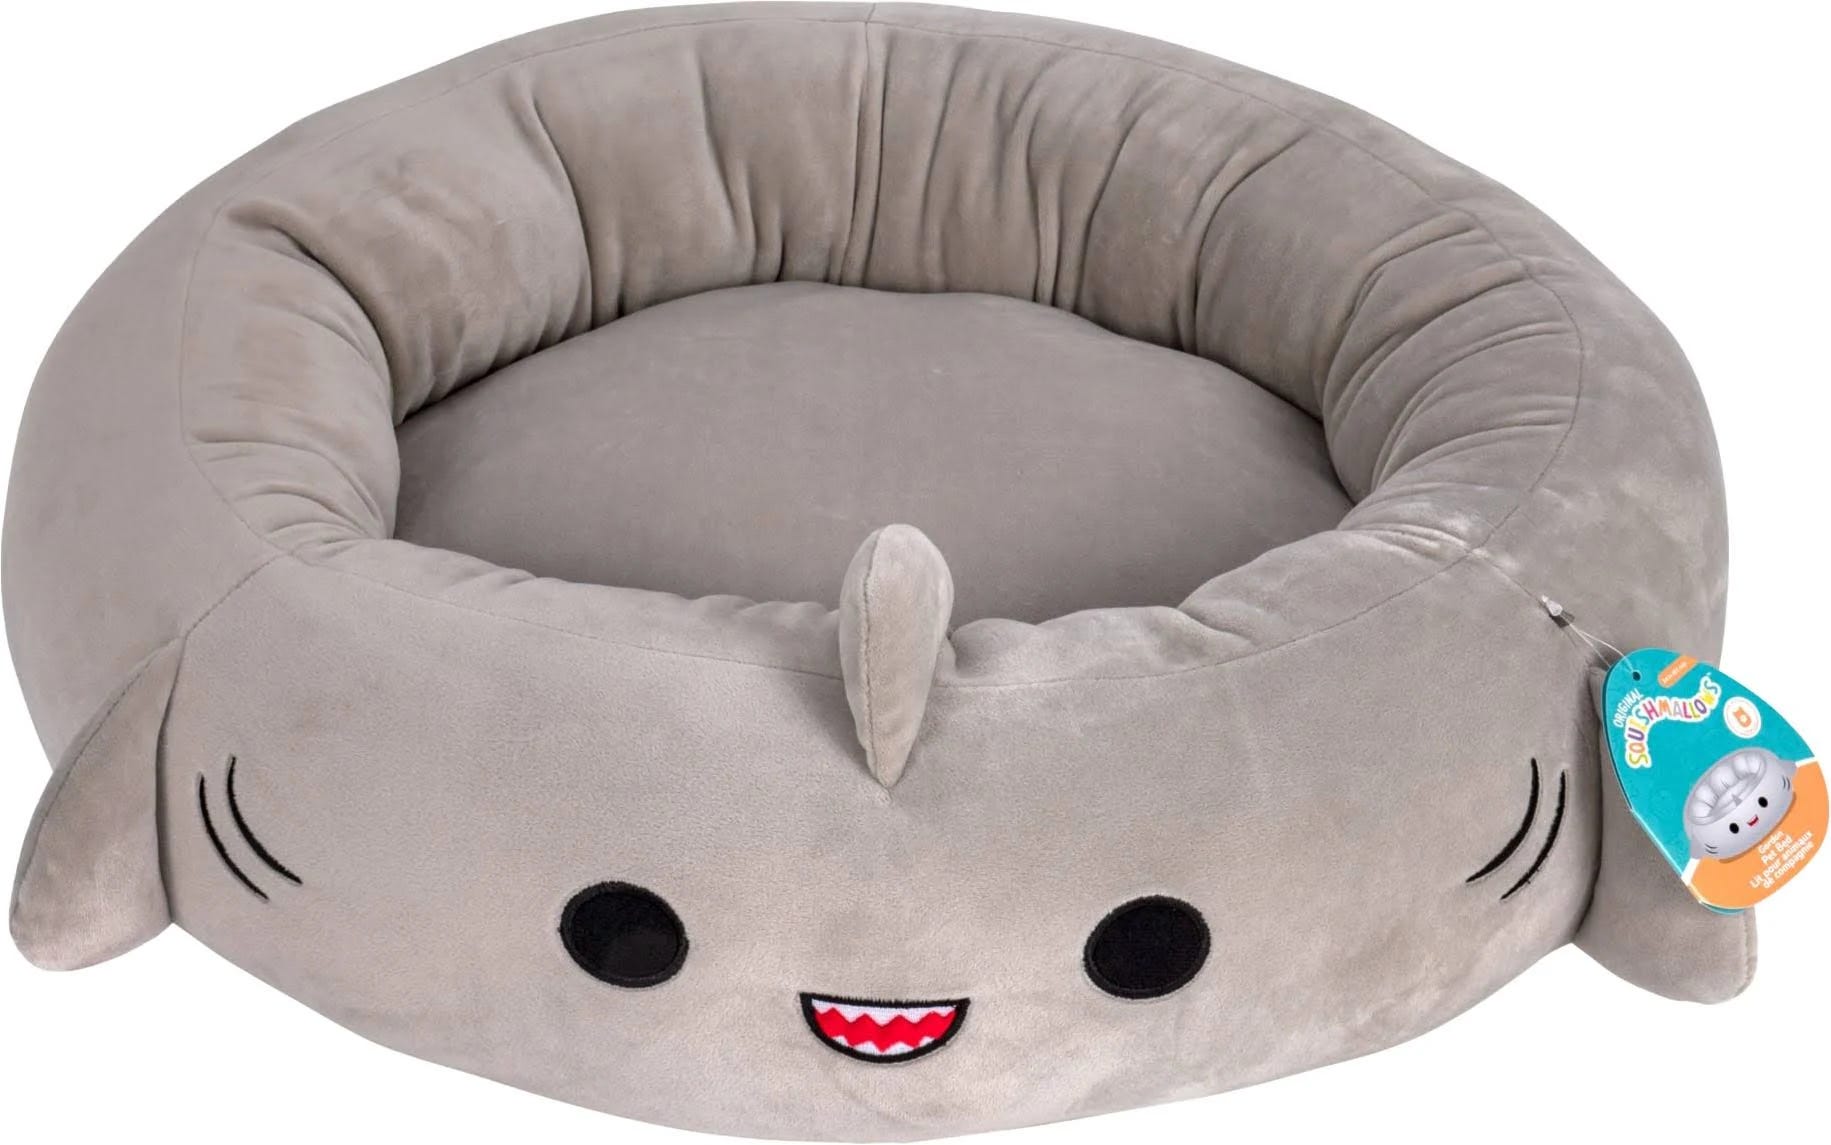 Squishmallows Gordon The Shark Pet Bed: Snuggly and Cuddly Dog Bed | Image